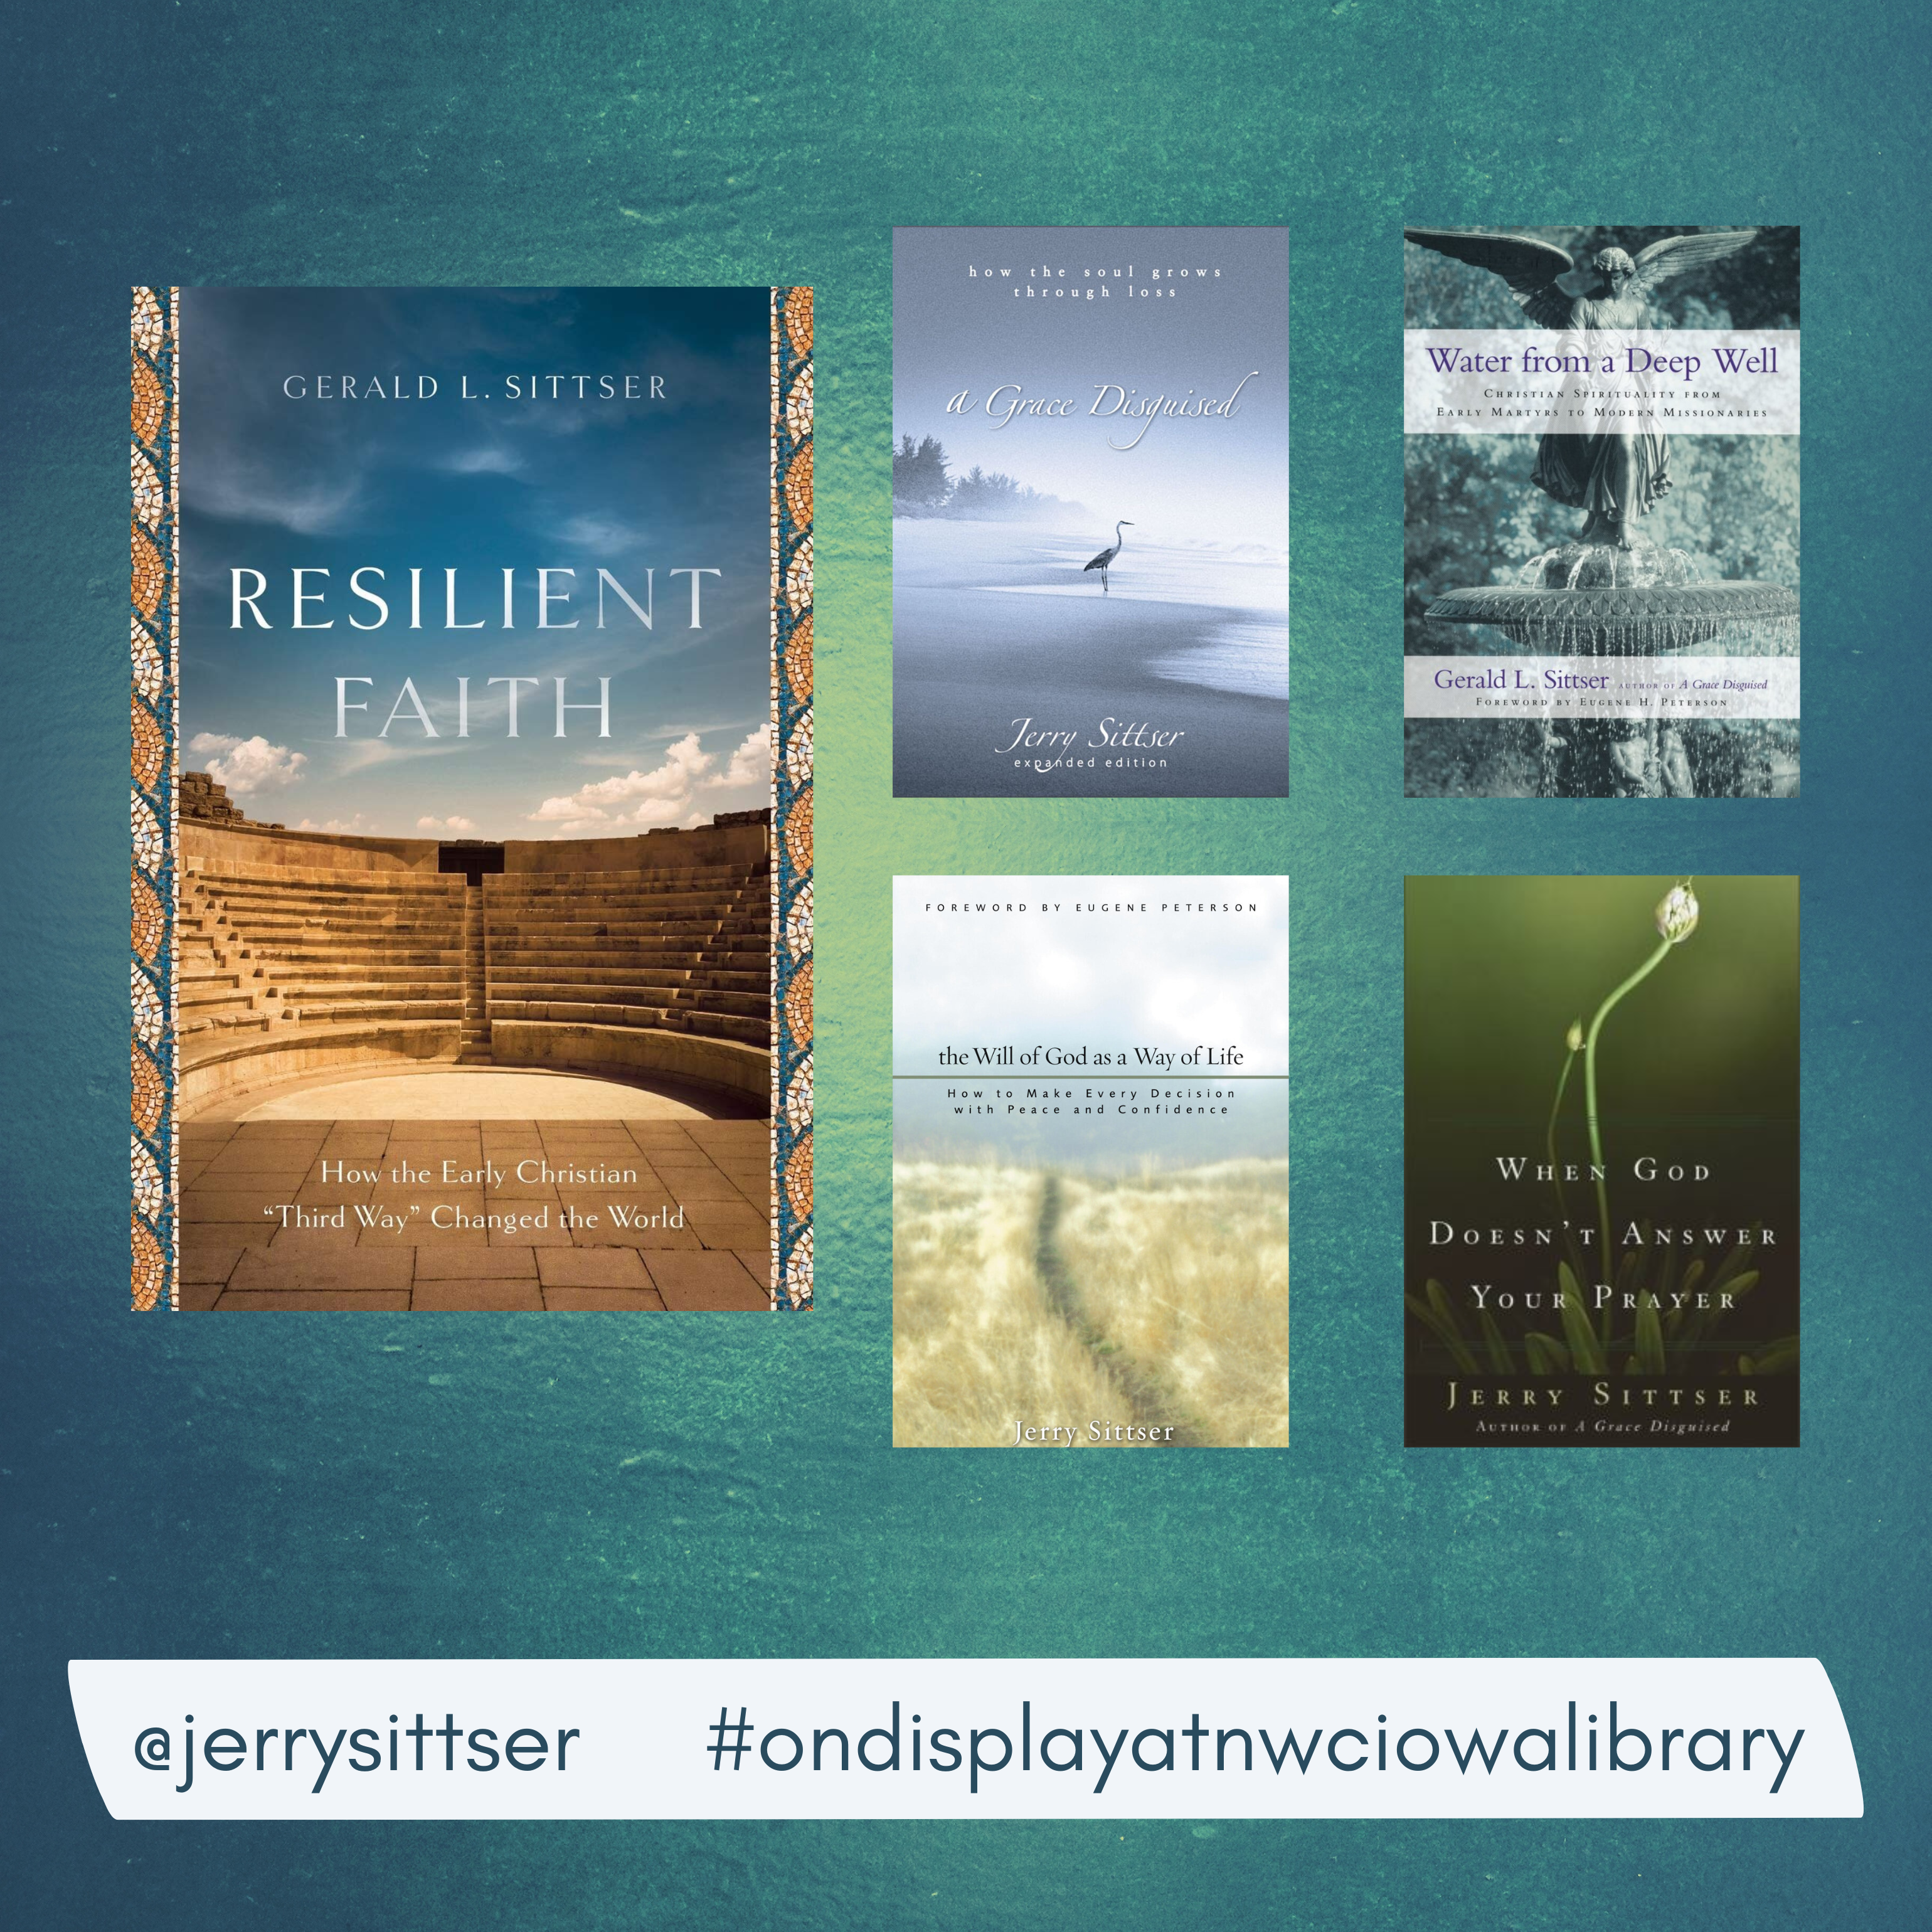 Now on Display: Books authored by Dr. Jerry Sittser. Stop by the Library Desk to view and borrow these books.